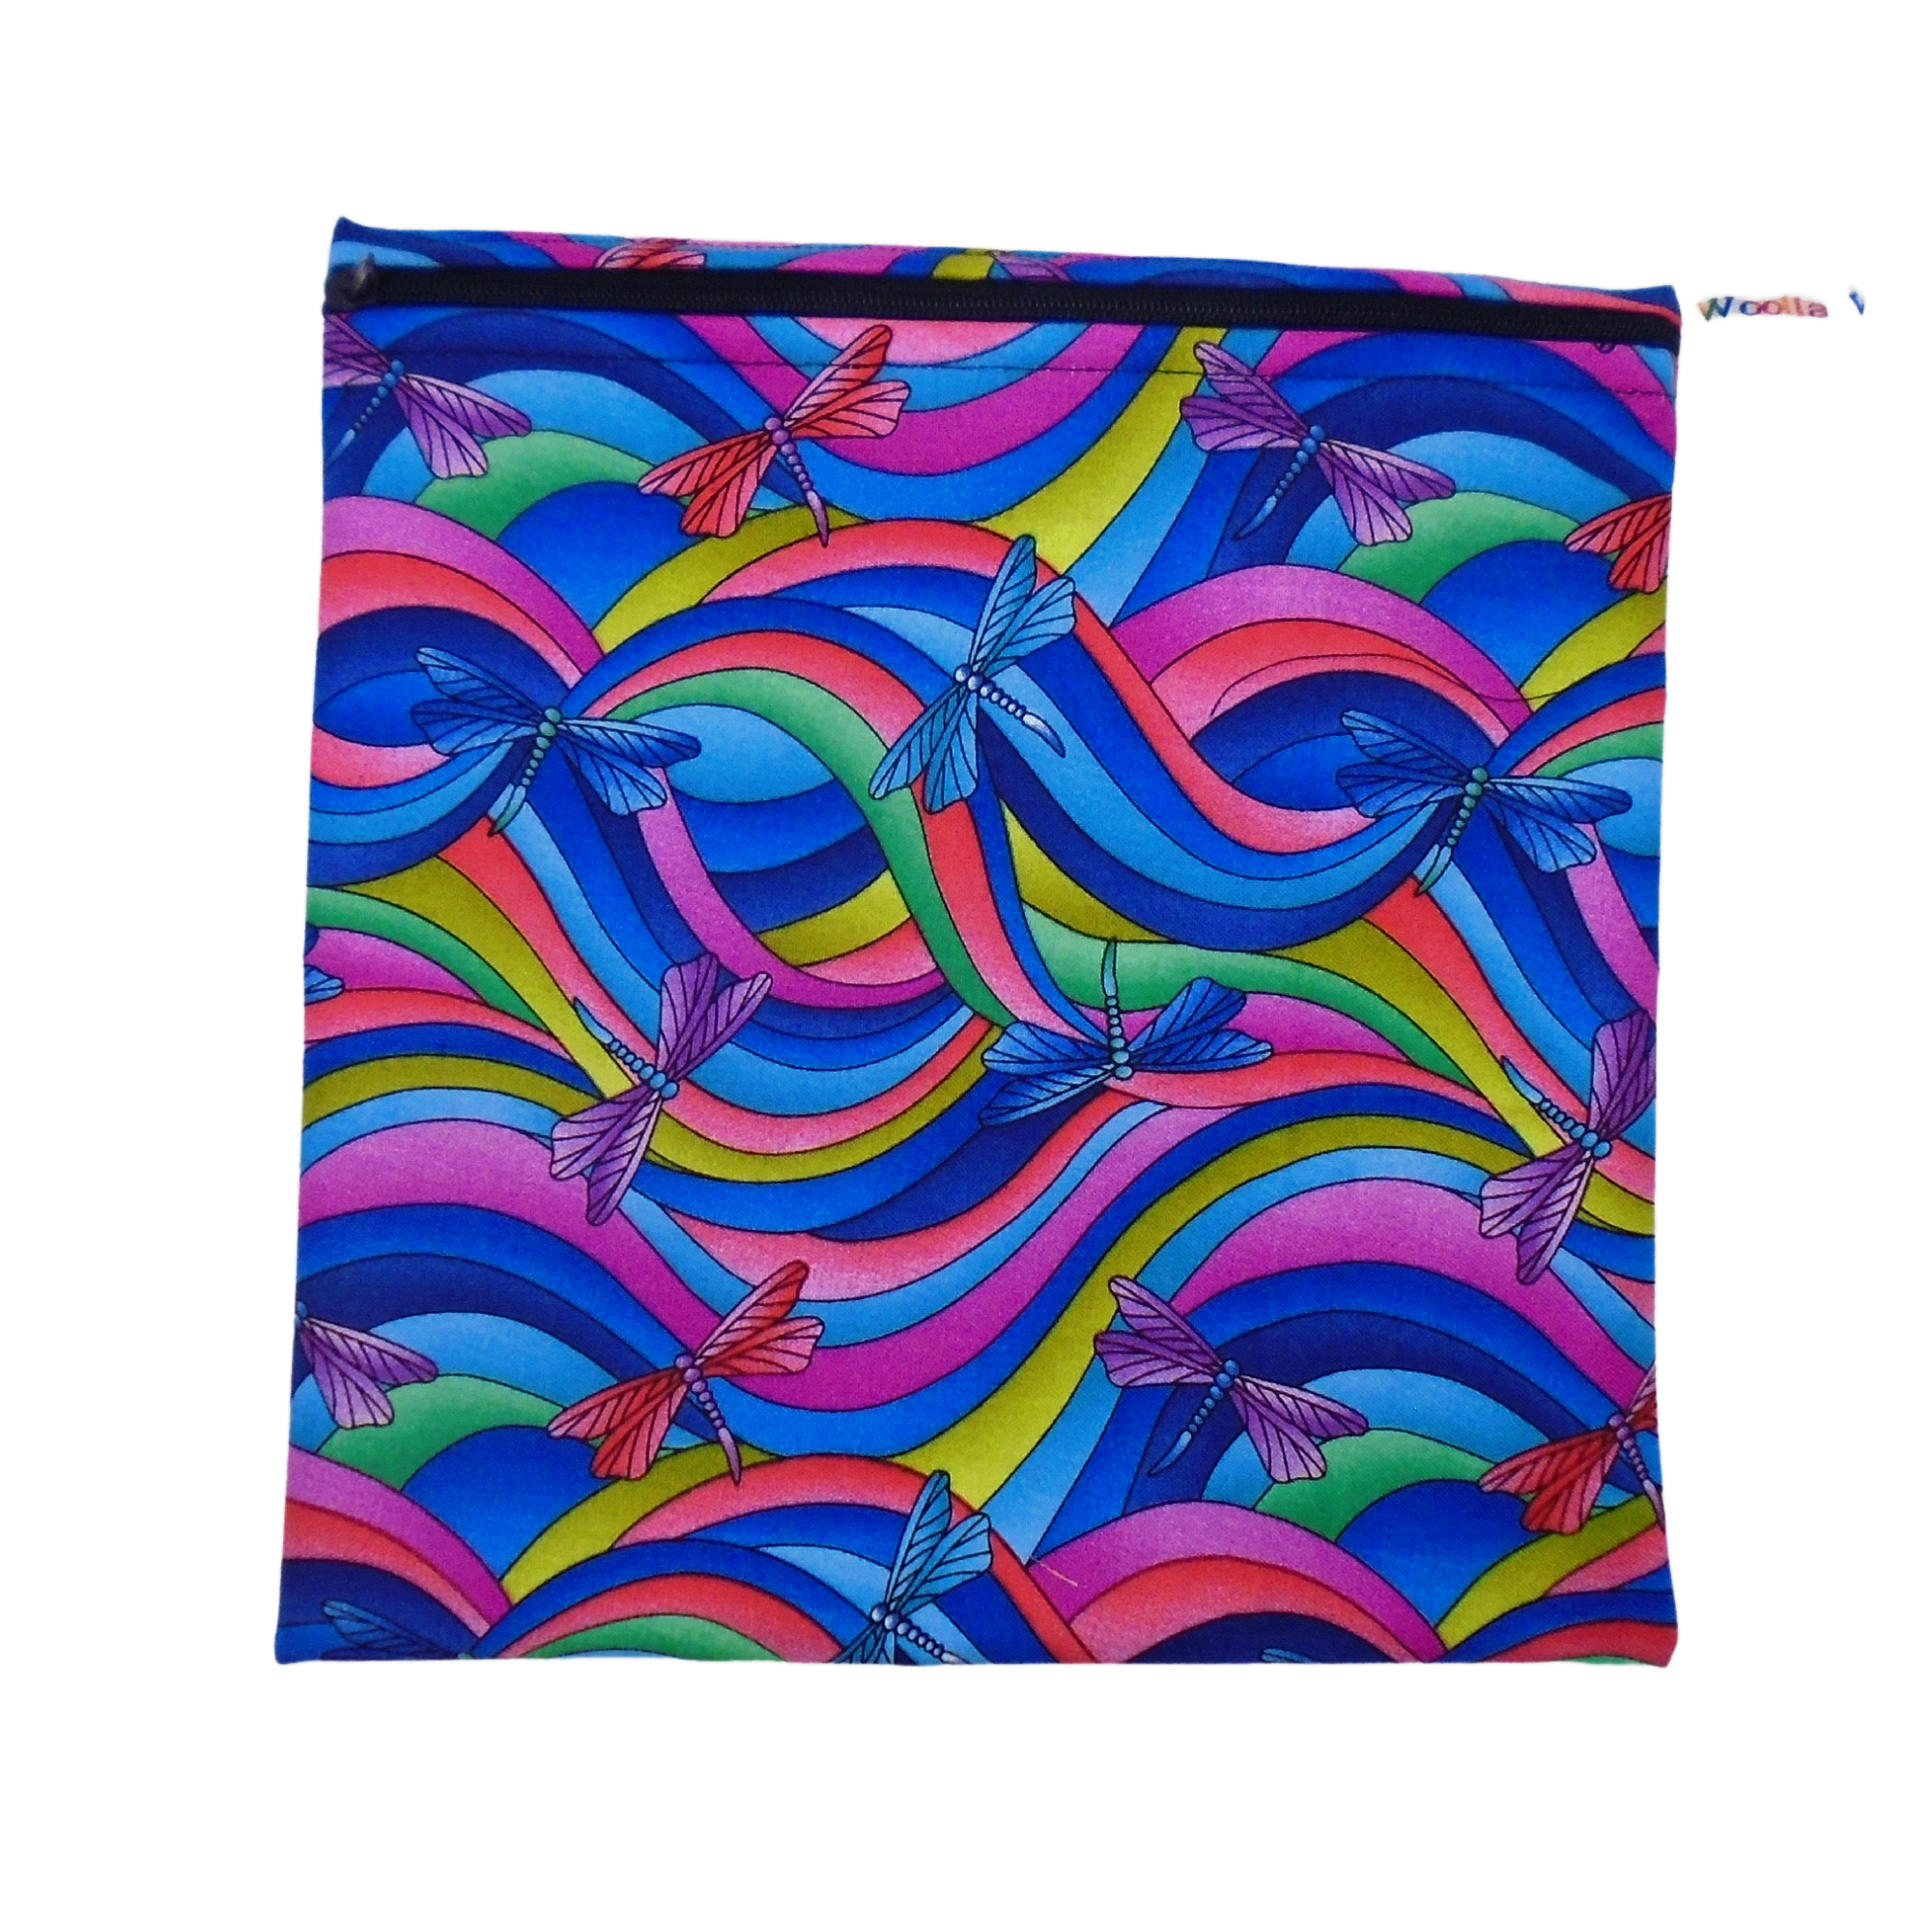 Dragonfly Dance Large Poppins Pouch - Waterproof, Washable, Food Safe, Vegan, Lined Zip Bag